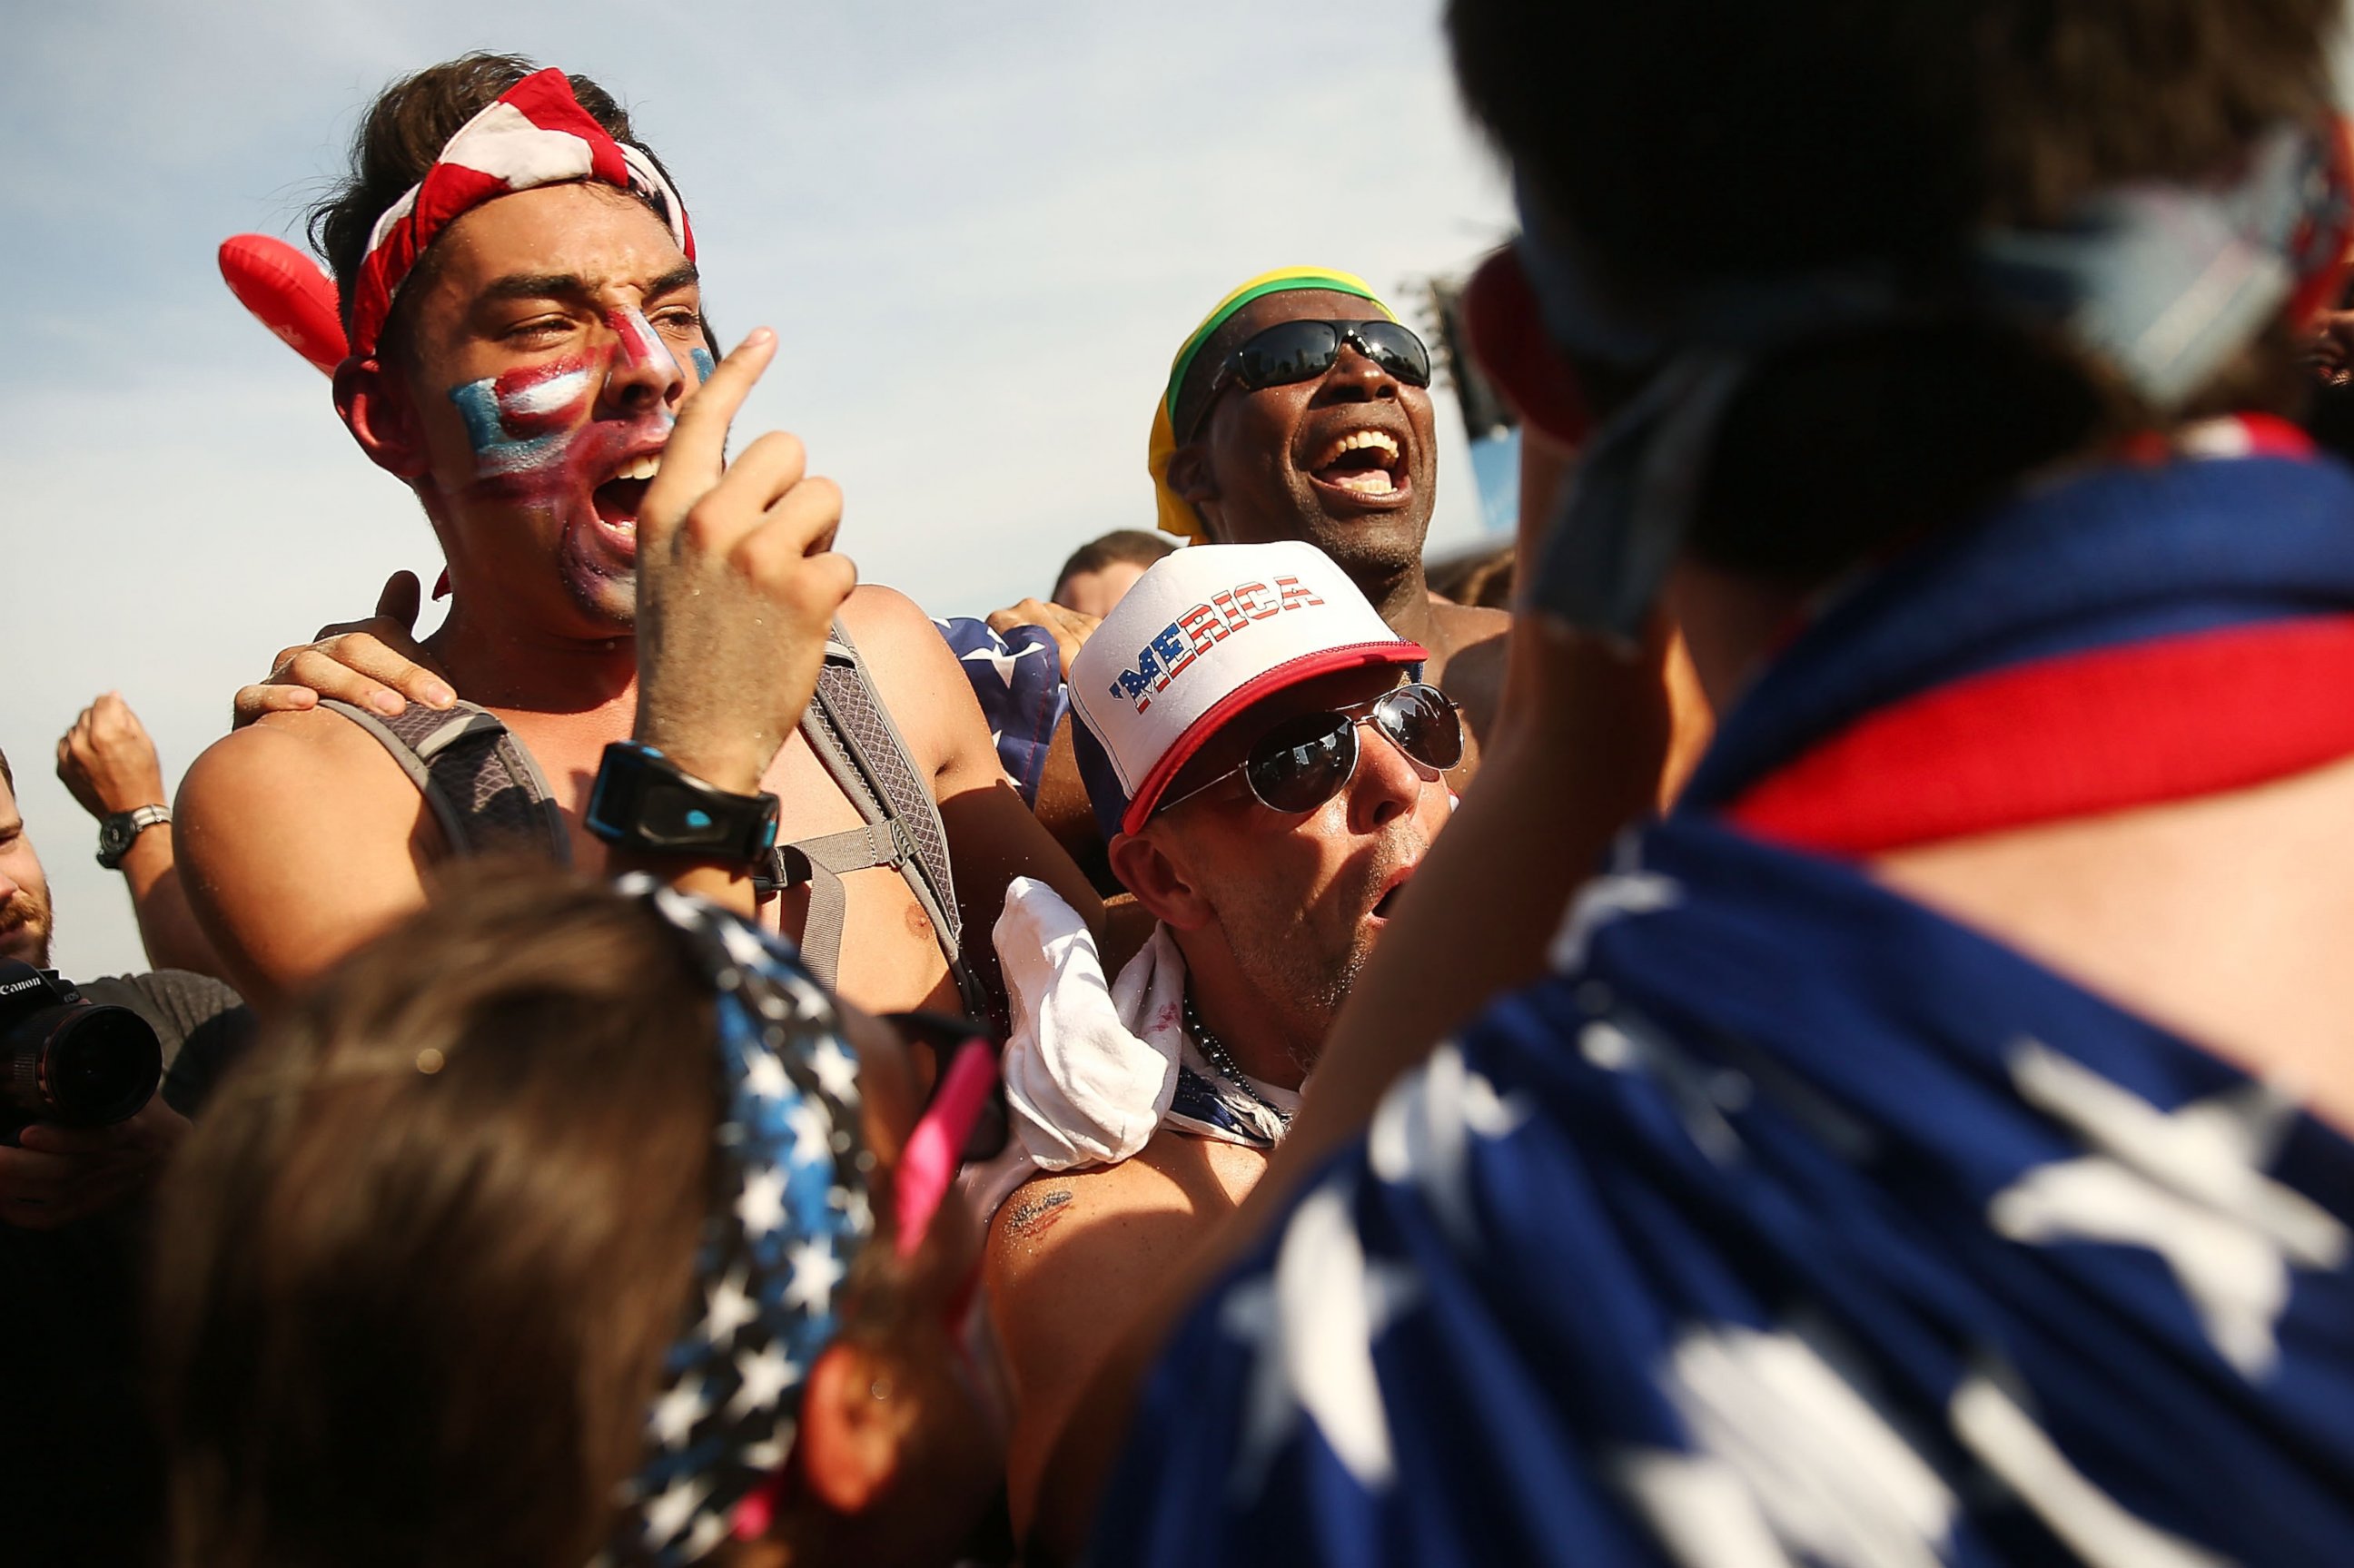 PHOTO: U.S. supporters celebrate advancing to the Round of 16 after their loss to Germany while watching the match at FIFA Fan Fest on June 26, 2014 in Rio de Janeiro, Brazil.